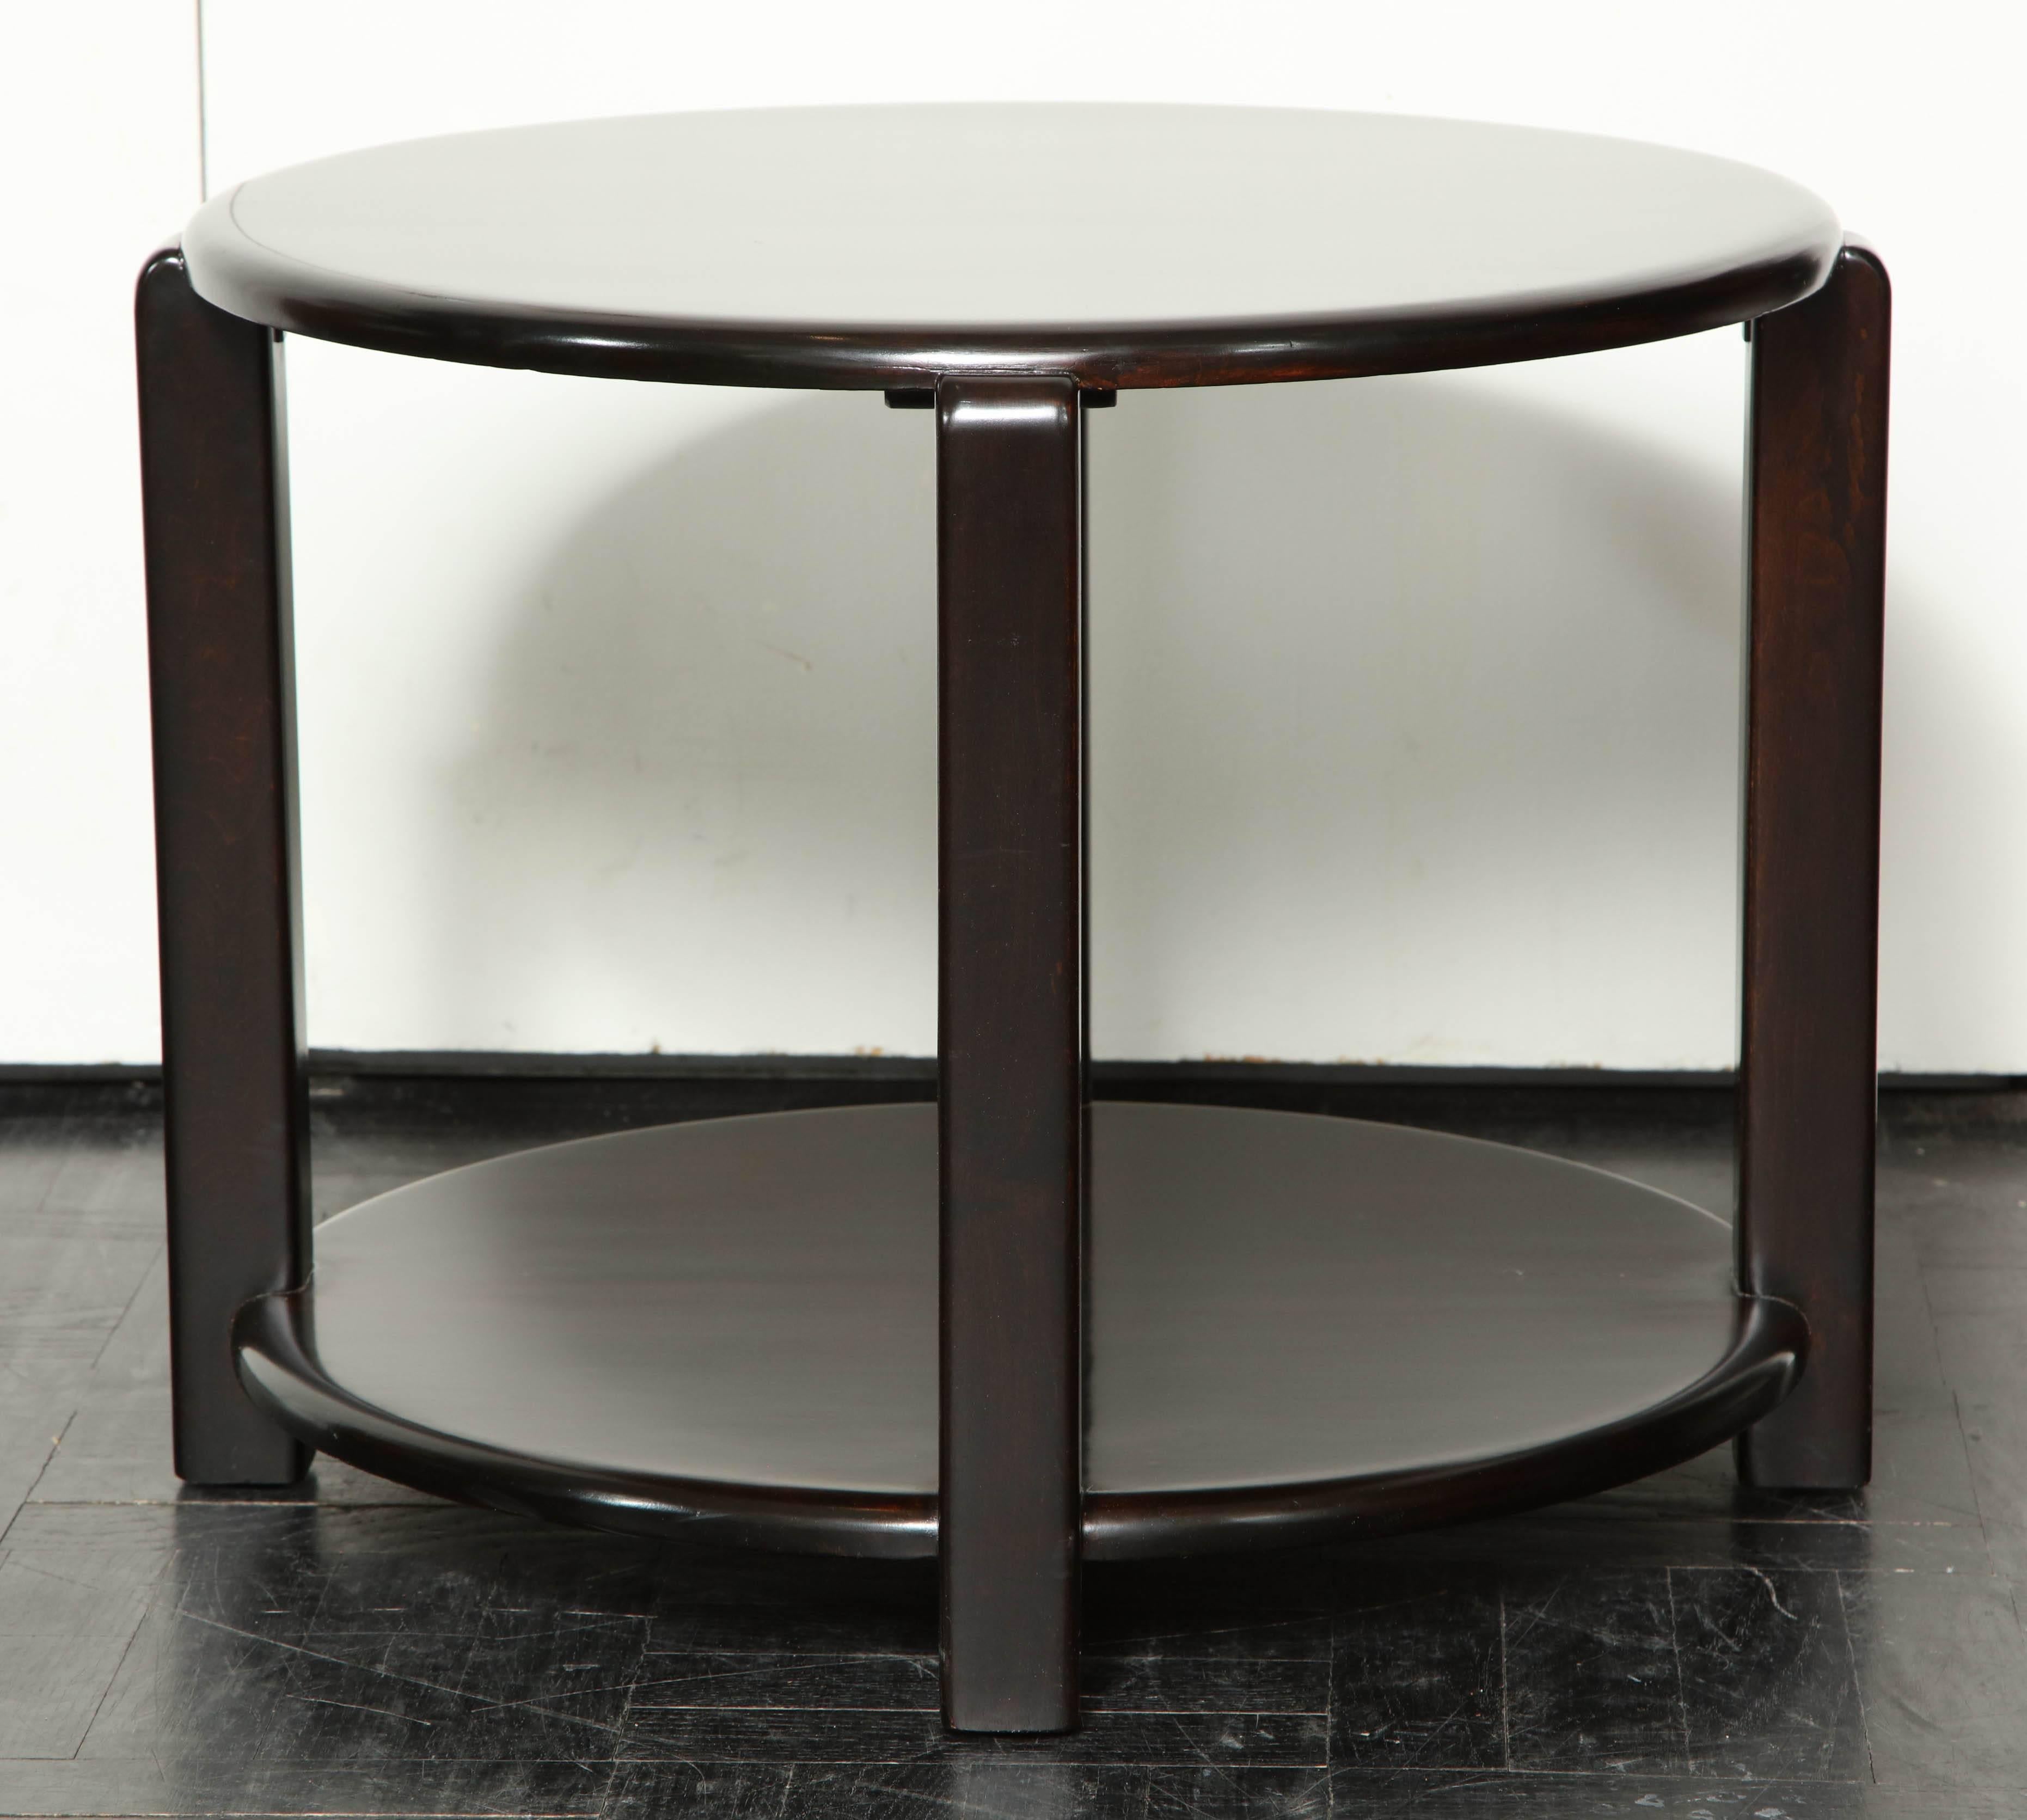 Mid-20th century two-tier ebonized walnut circular table, four polished supports.